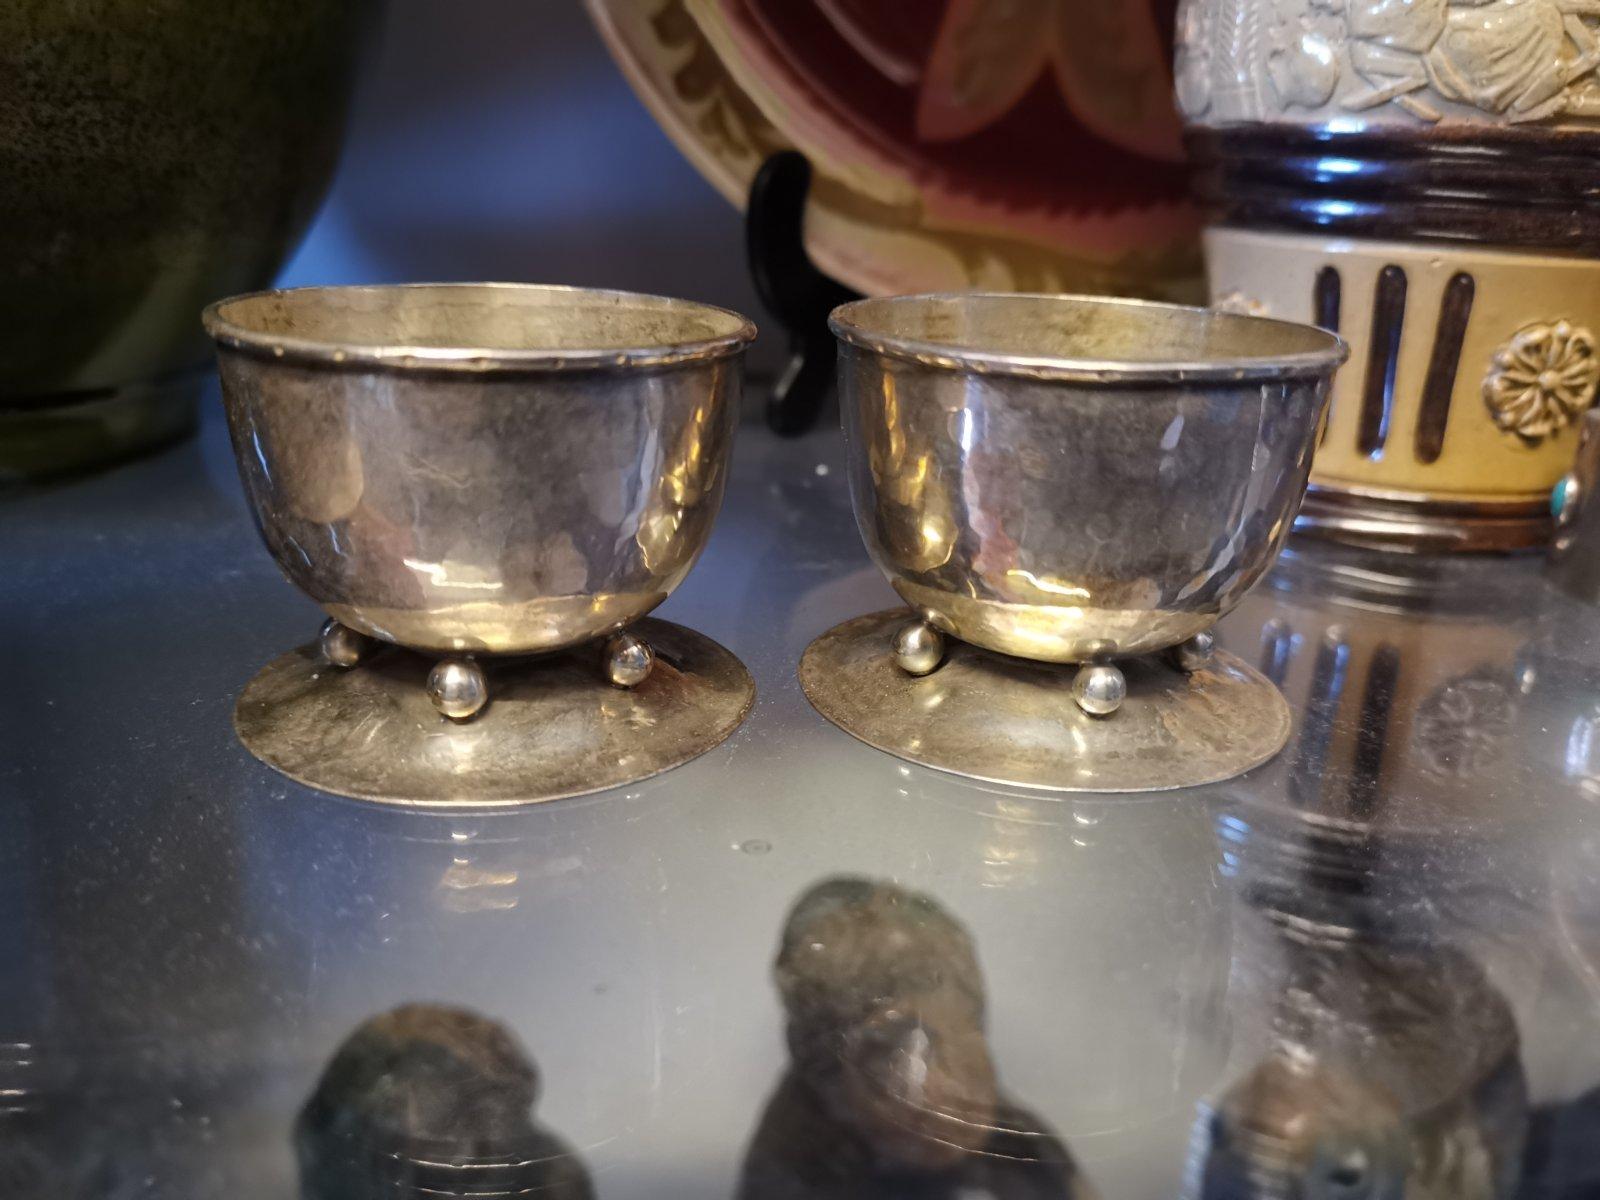 C R Ashbee for the guild of handicraft.
A rare pair of Arts & Crafts silver salt bowls with roll-over rims and dot decoration to the bowl edges stood on four ball feet on a flaring base foot.
Ashbee returned to this ball feet design on many